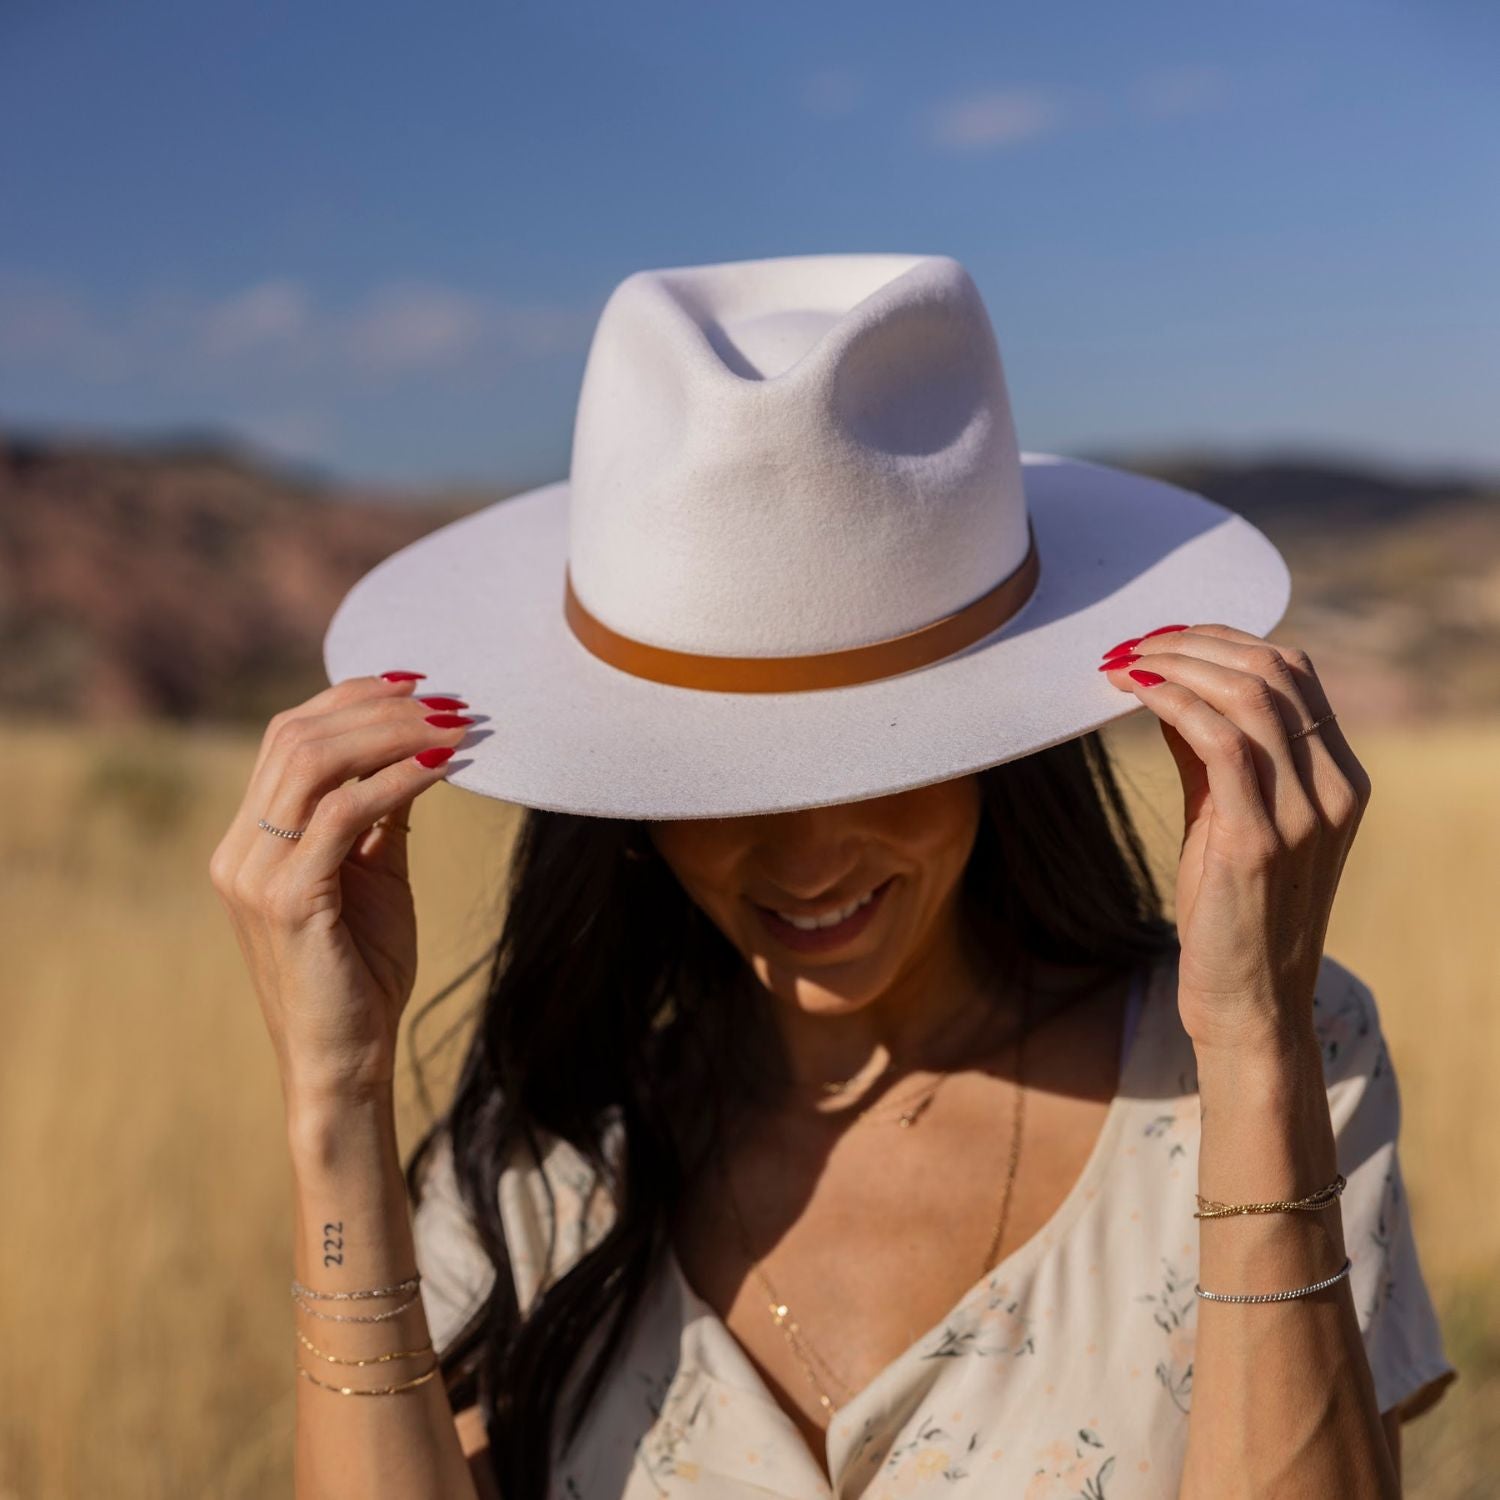 The Great Hat | Ivory